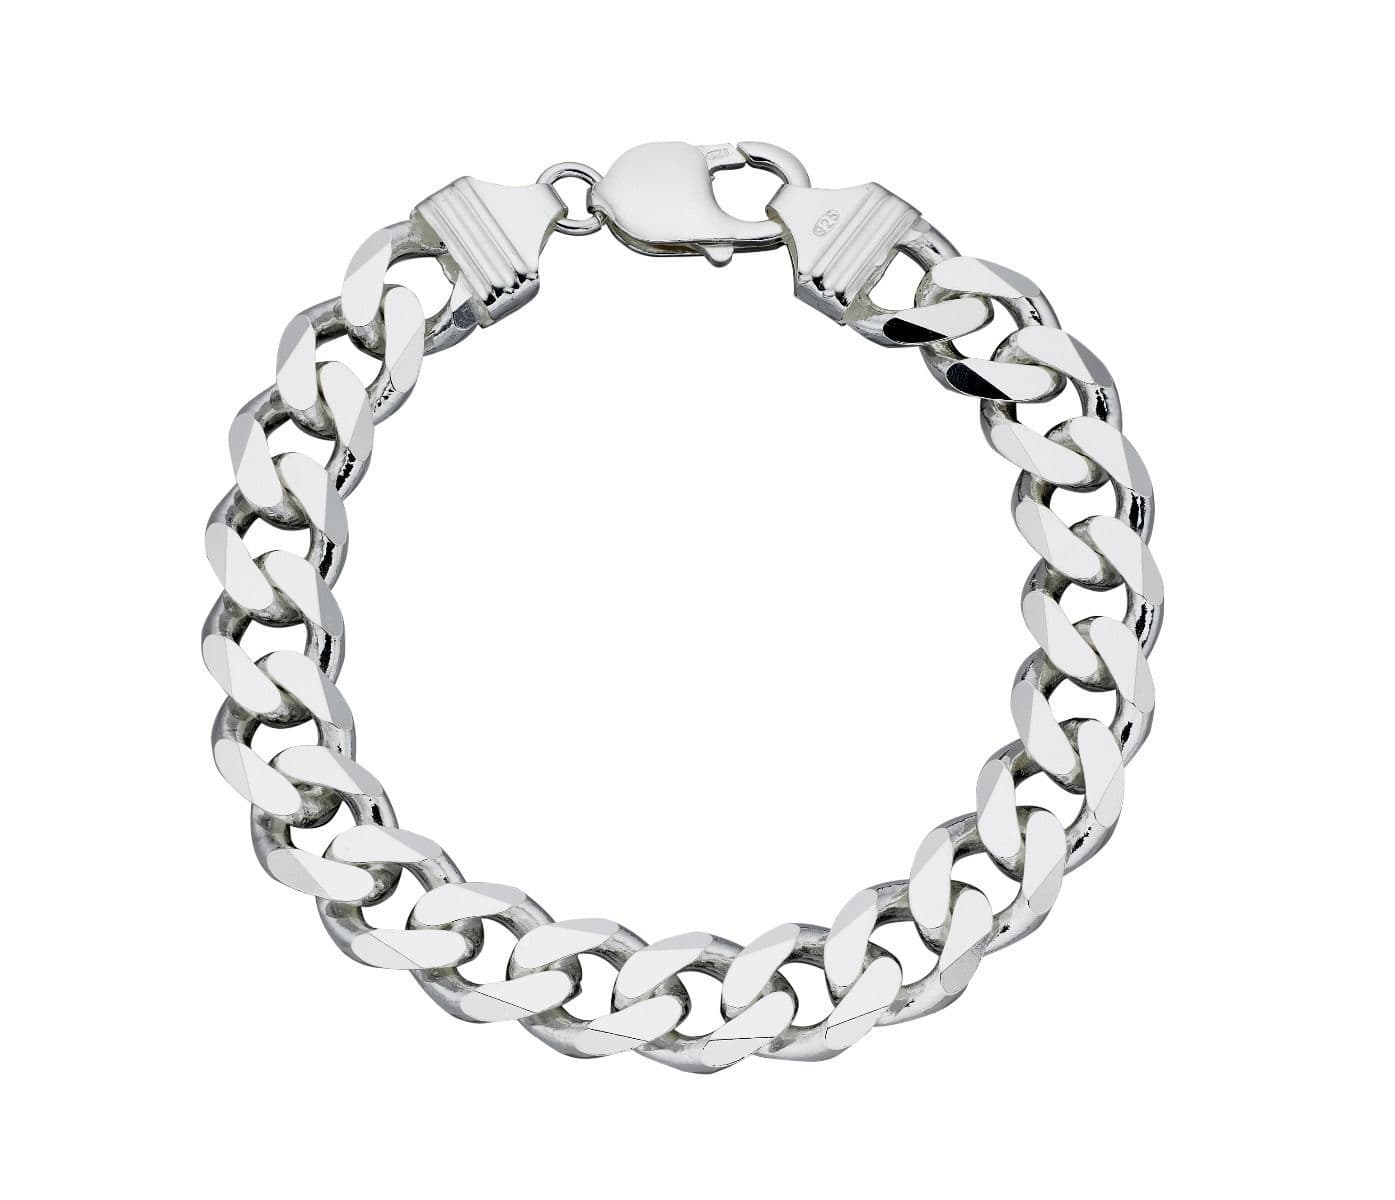 Men's solid 40g sterling silver extra heavyweight 9 inch curb bracelet